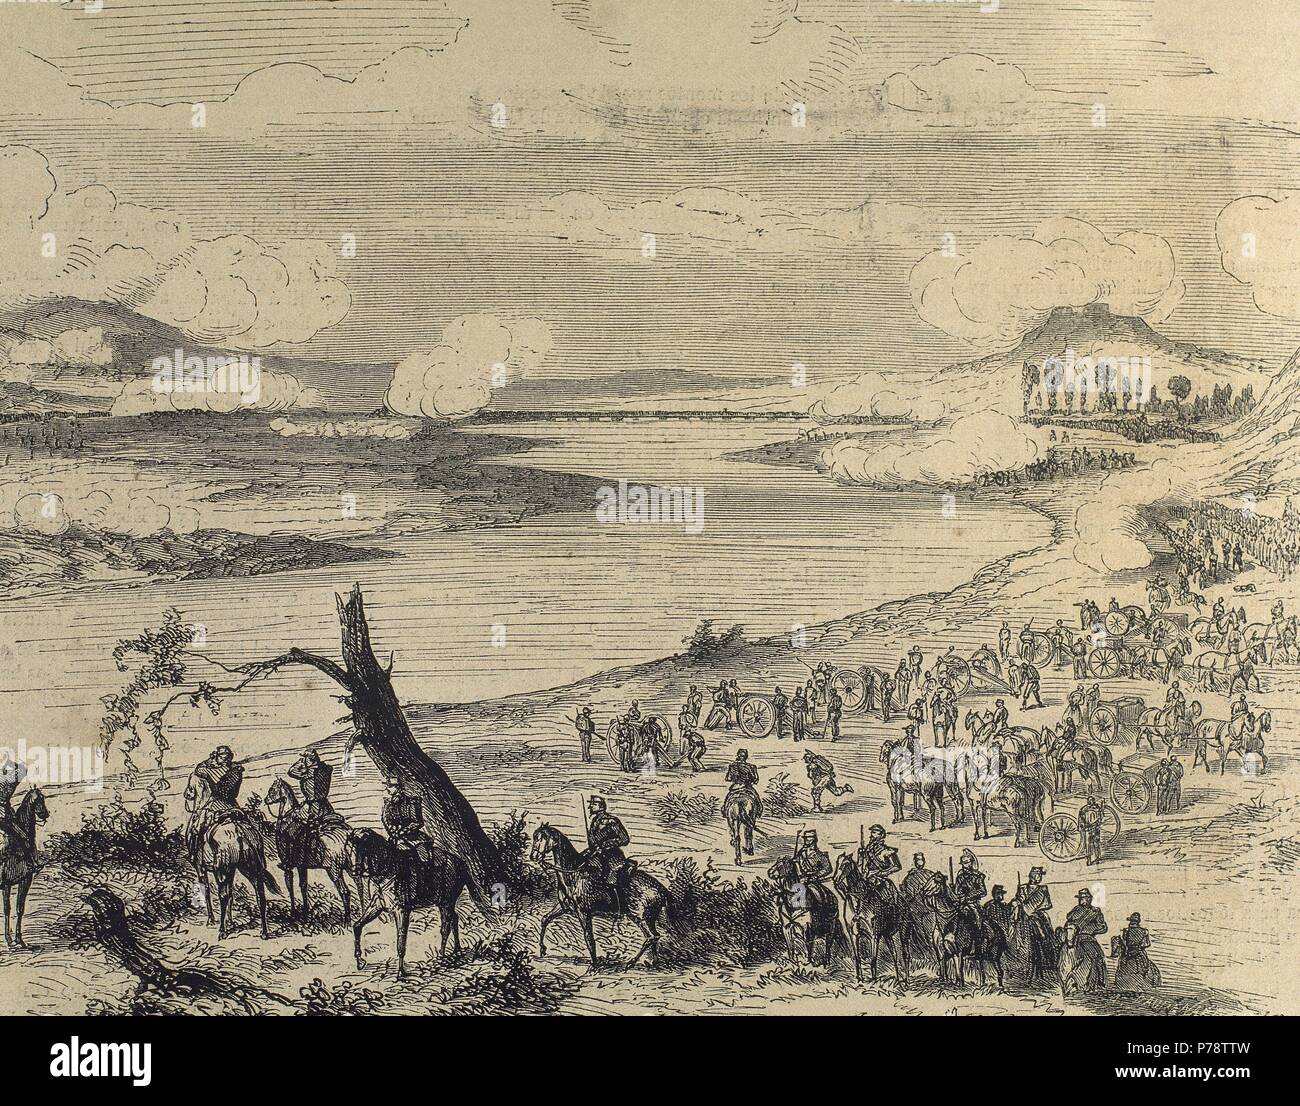 Franco-Prussian War. 1870-1871. Conflict between the Second French Empire and the German states of the North German Confederation led by the Kingdom of Prussian. Longeville Battle. Engraving by A. Daudenarez. La Ilustracion Espanola y Americana, 1870. Stock Photo